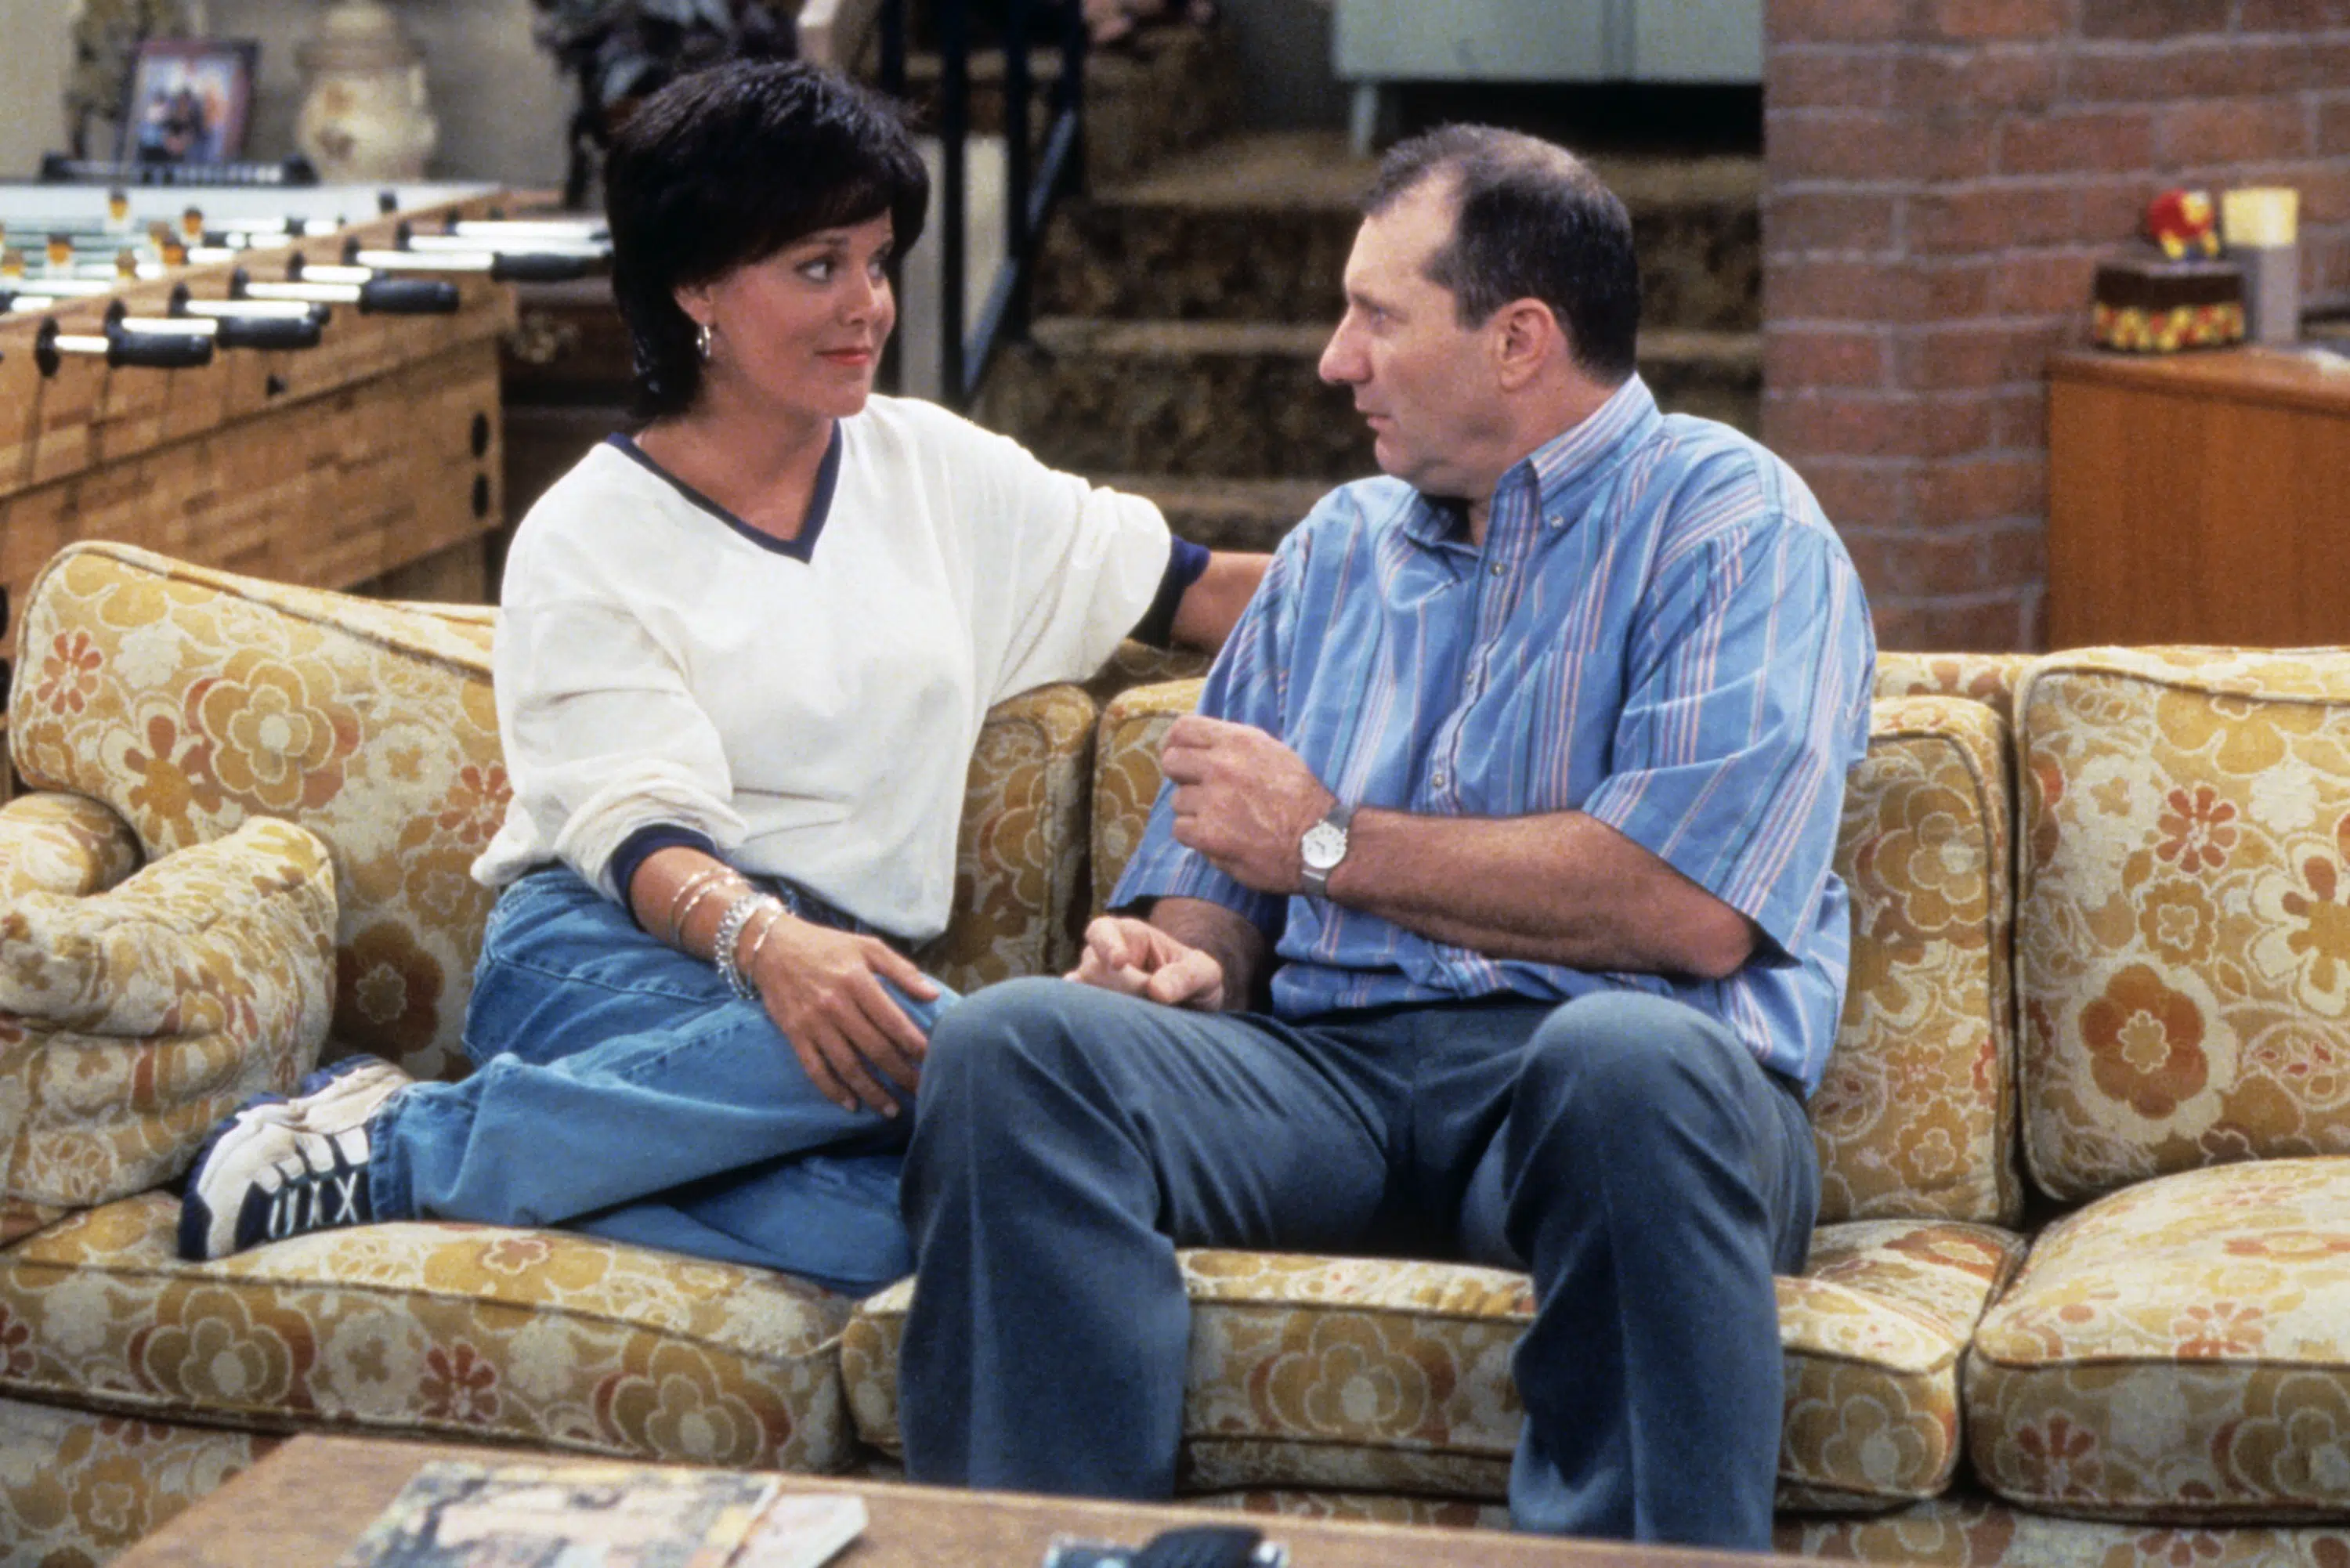 MARRIED...WITH CHILDREN, from left: Amanda Bearse, Ed O'Neill, 1987-1997